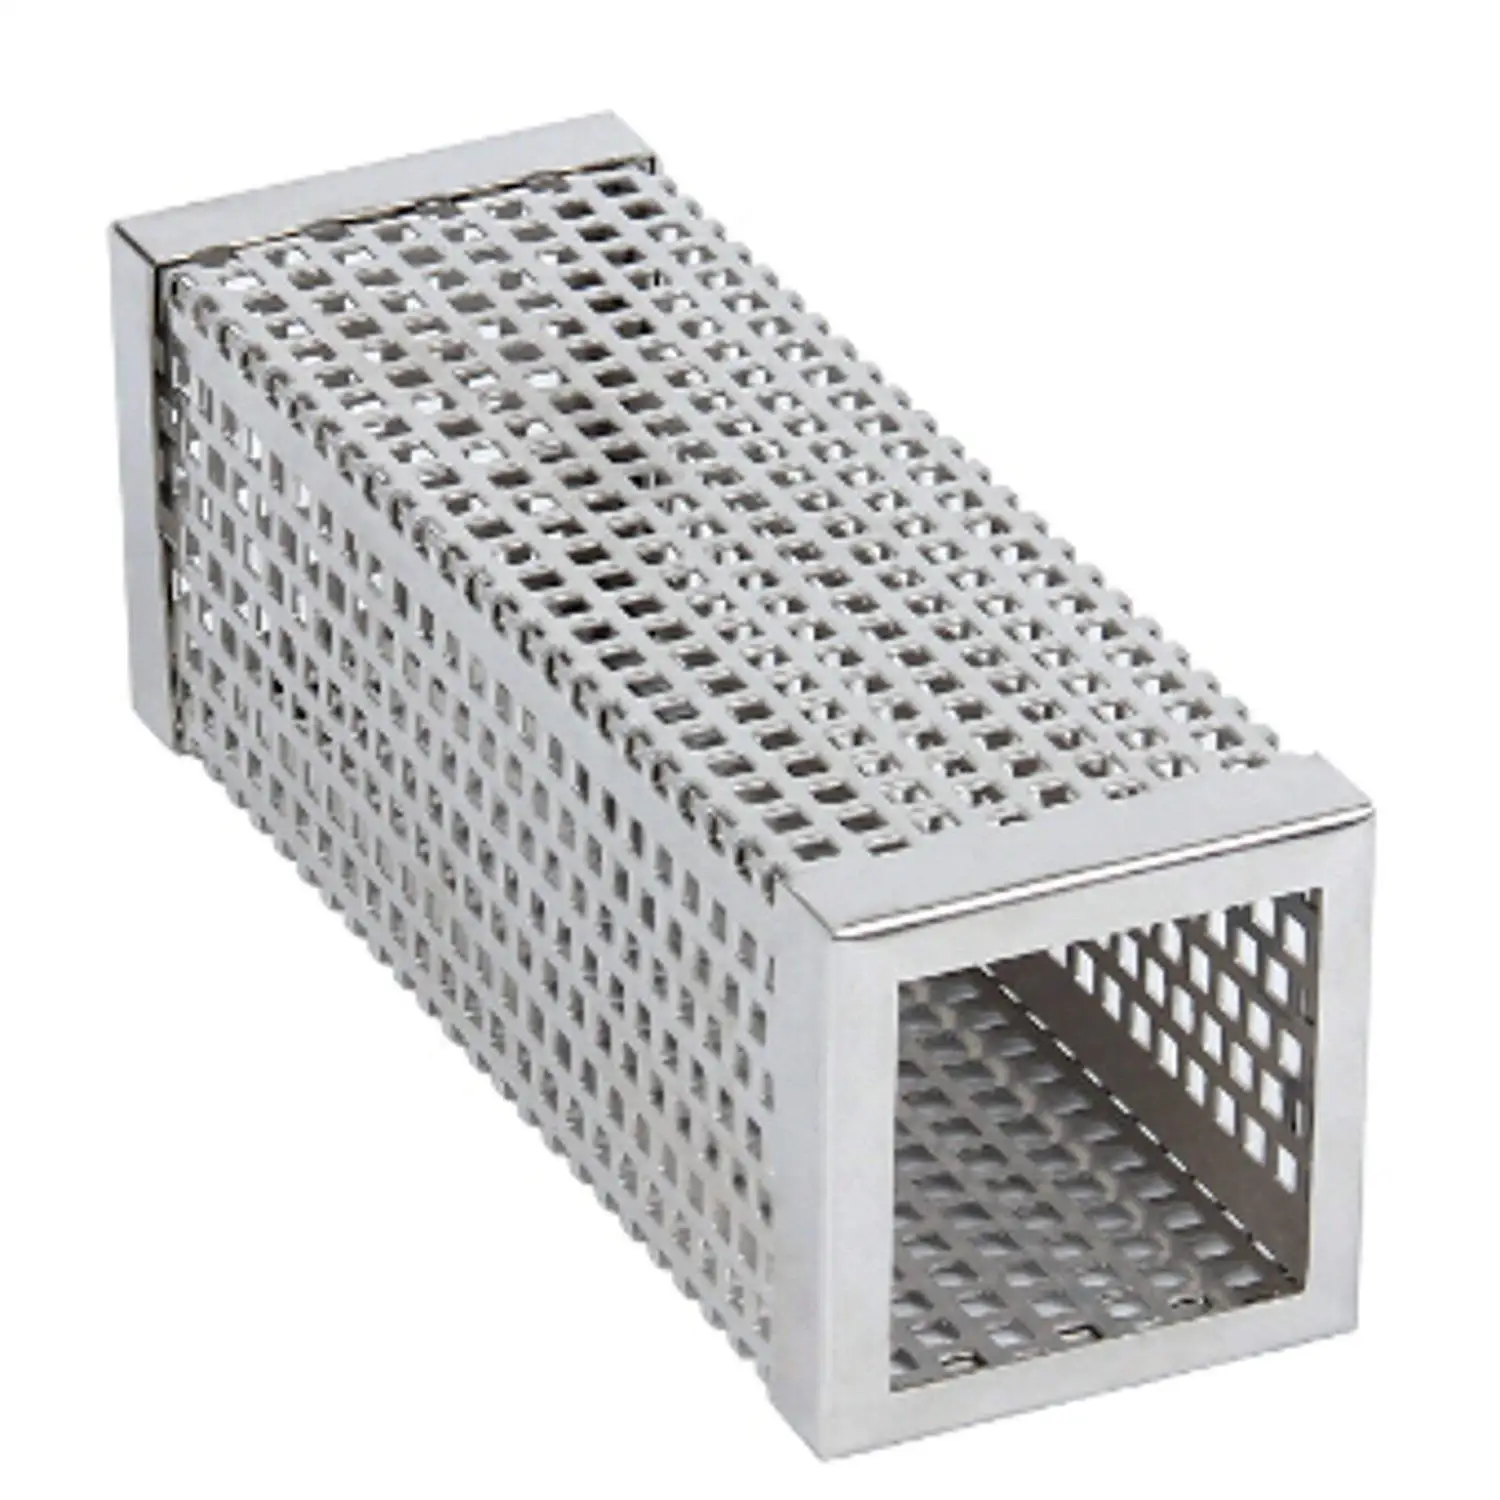 Cheap Pellet Grill Accessories Find Pellet Grill Accessories Deals On Line At Alibaba Com,Types Of Shrubs In Texas